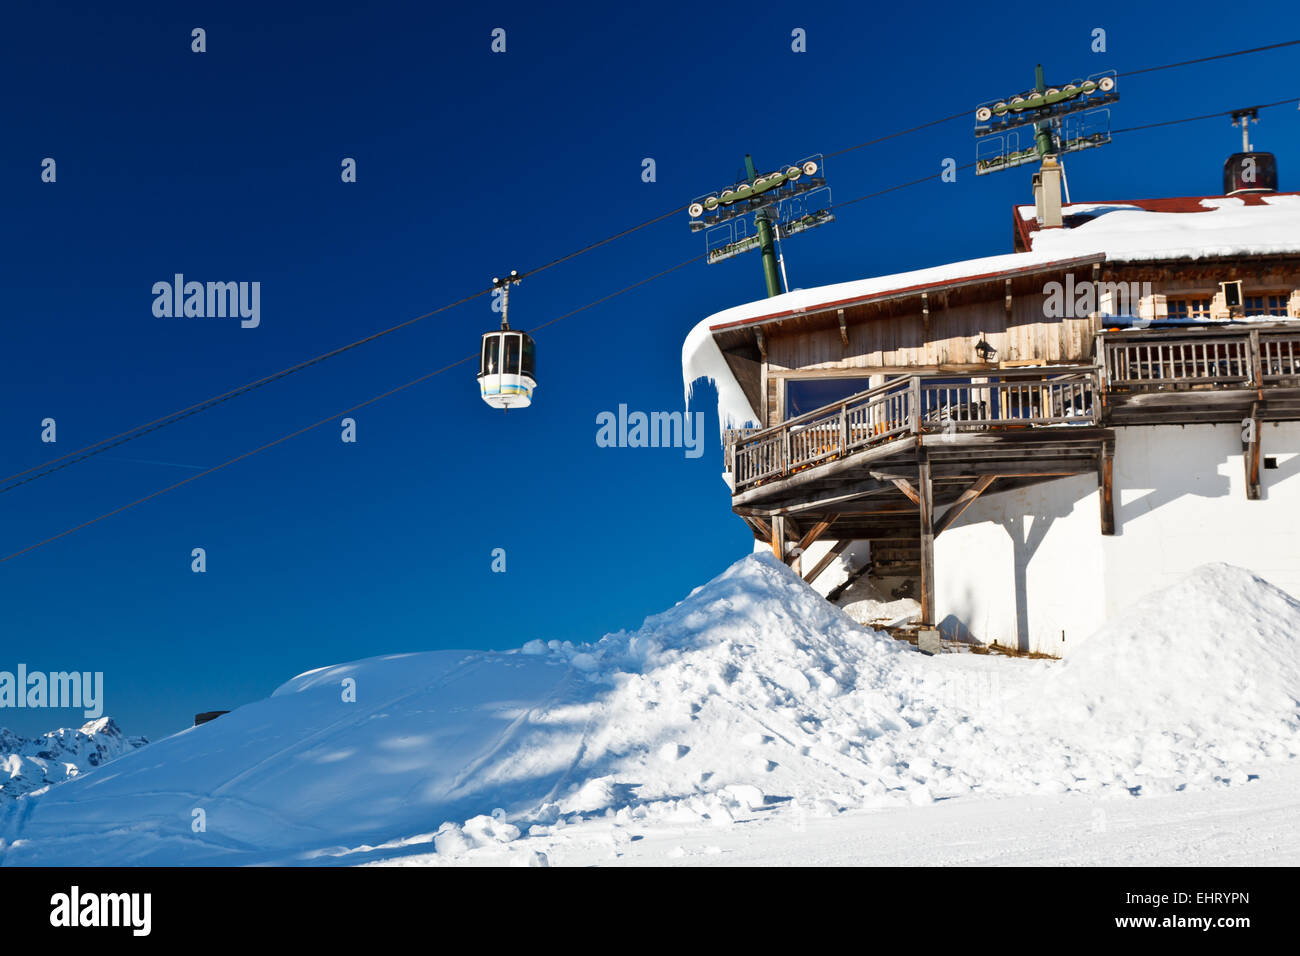 Upper Cable Lift Station and Gondola in French Alps Stock Photo